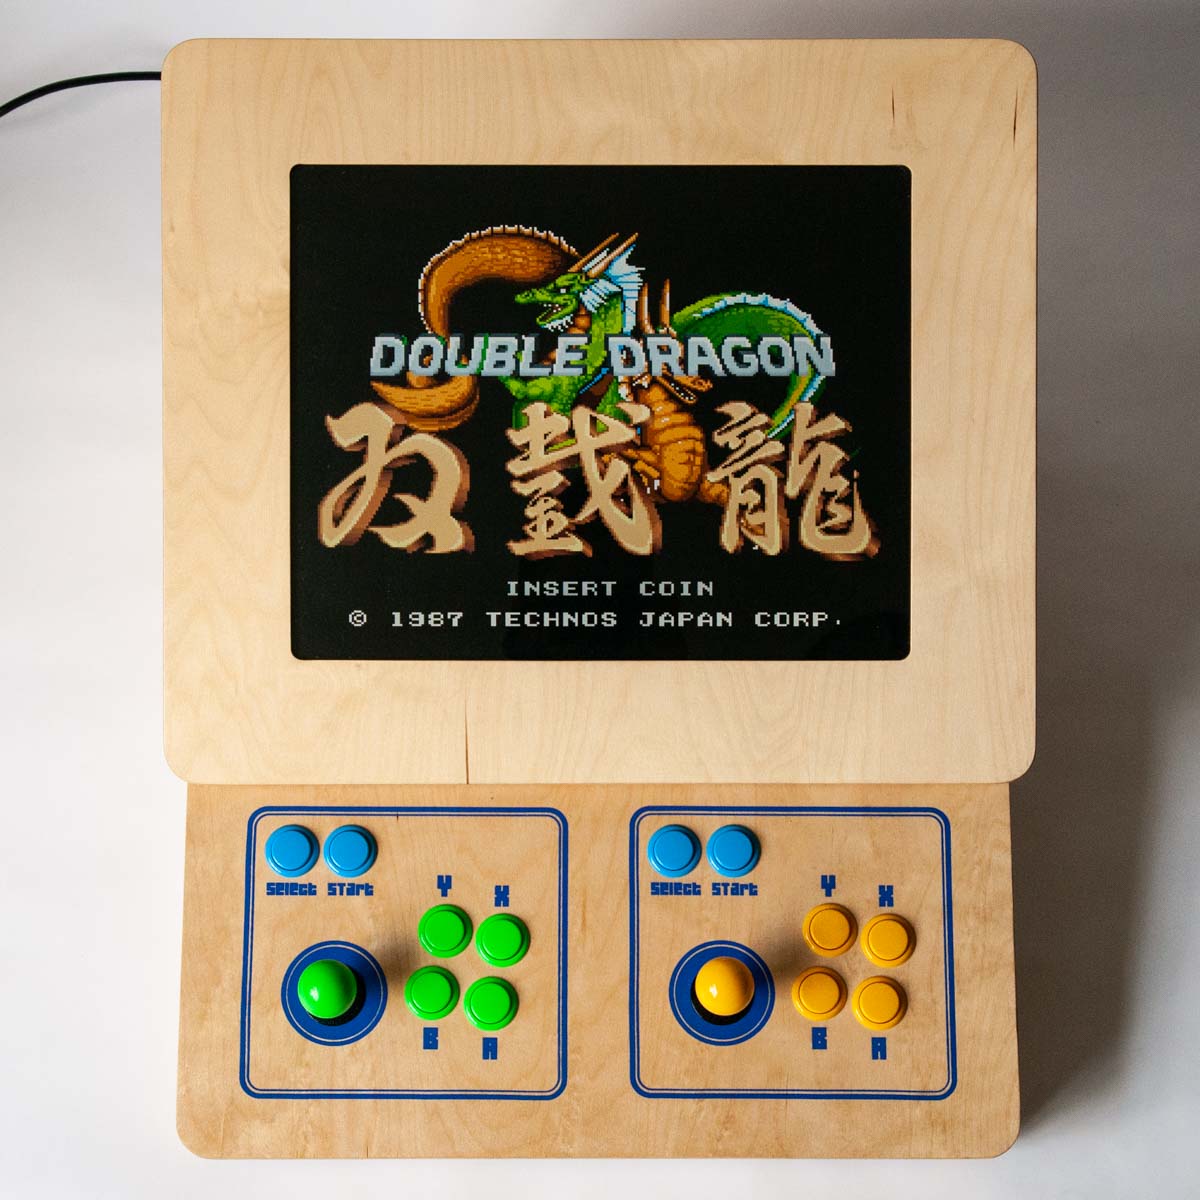 Arcade cabinet front